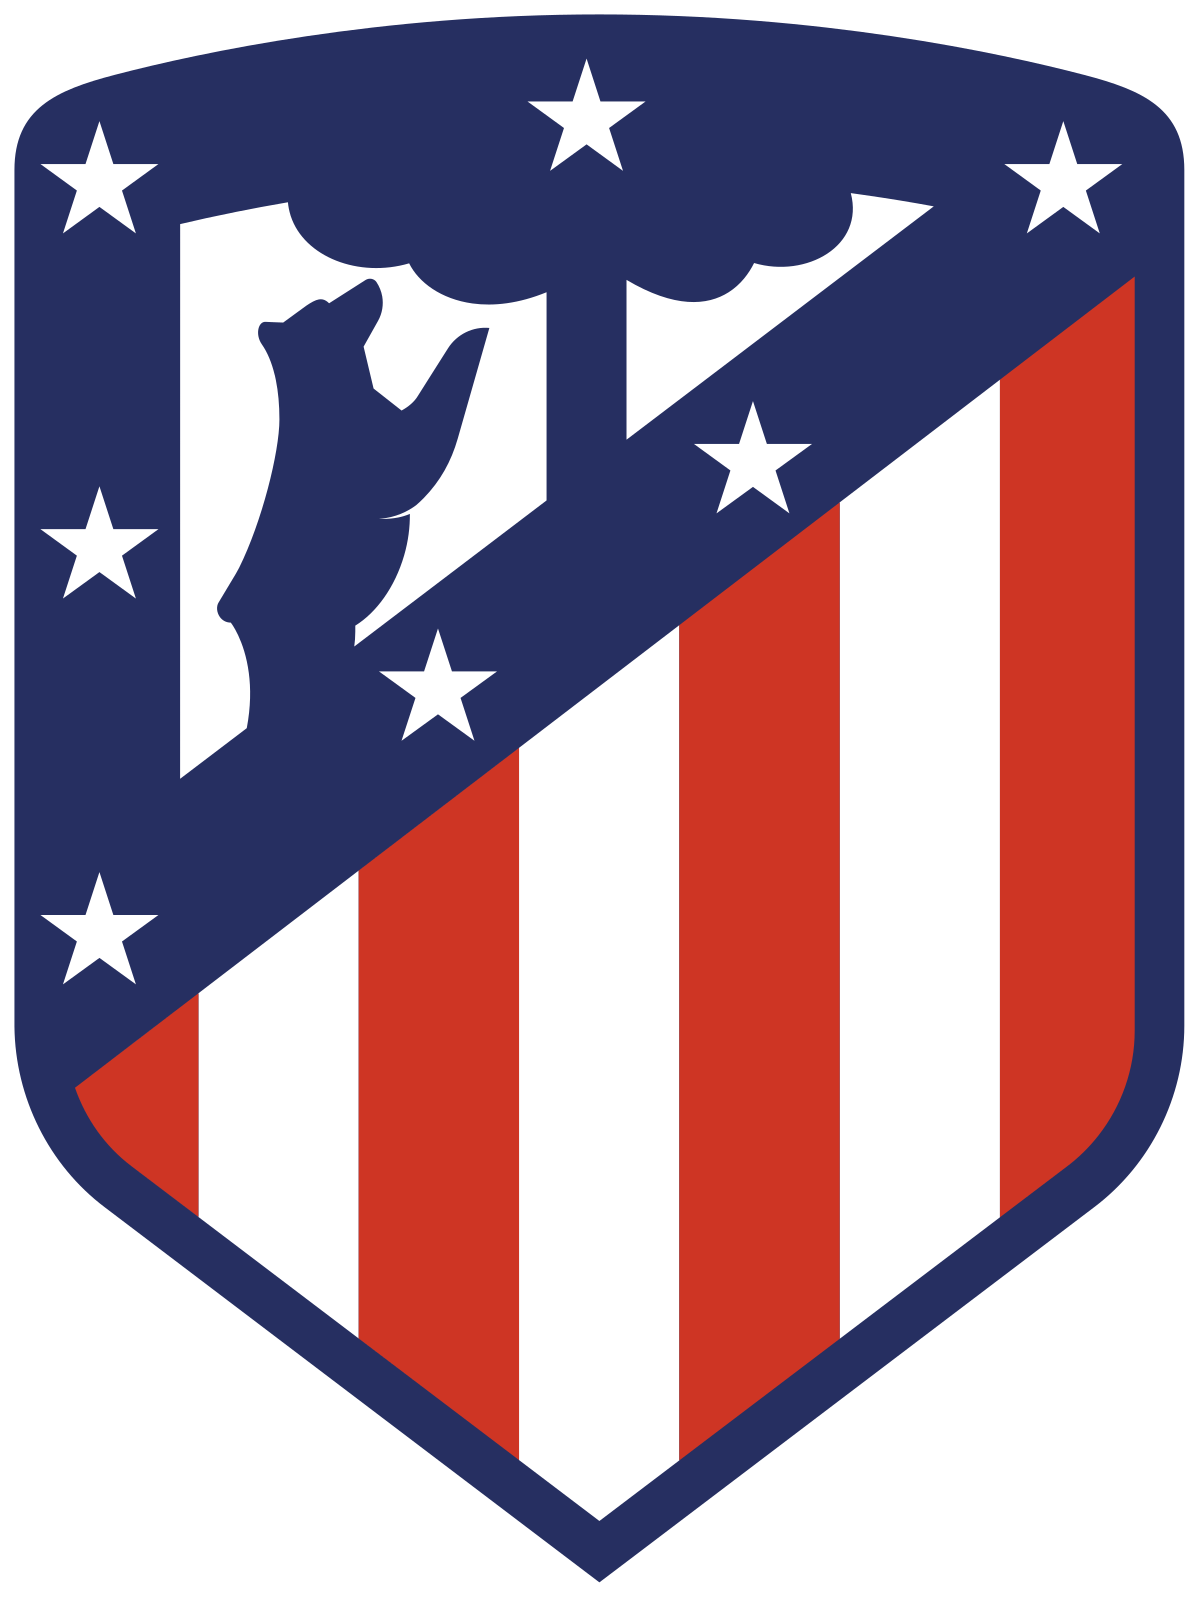 https://www.eureporter.co/wp-content/uploads/2021/06/Atletico-Madrid.png